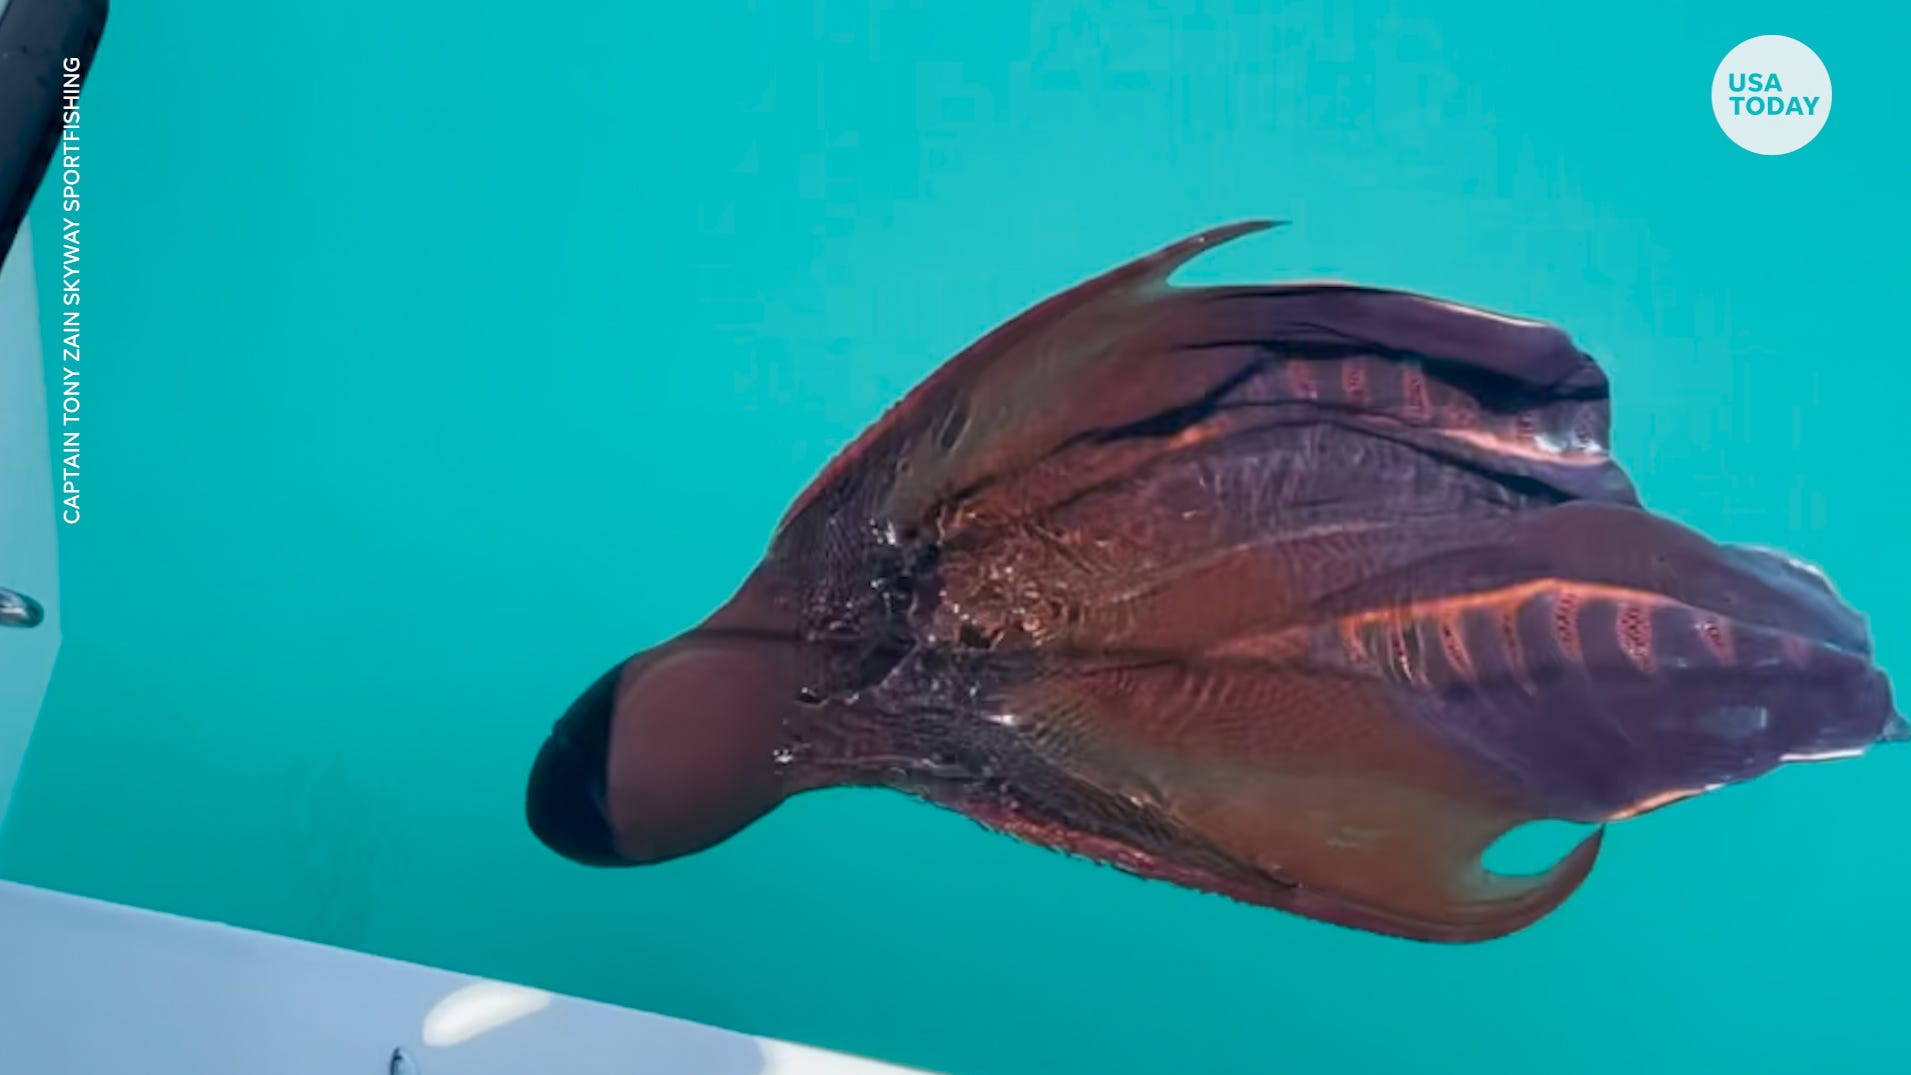 Rare Blanket Octopus Caught On Camera In Florida